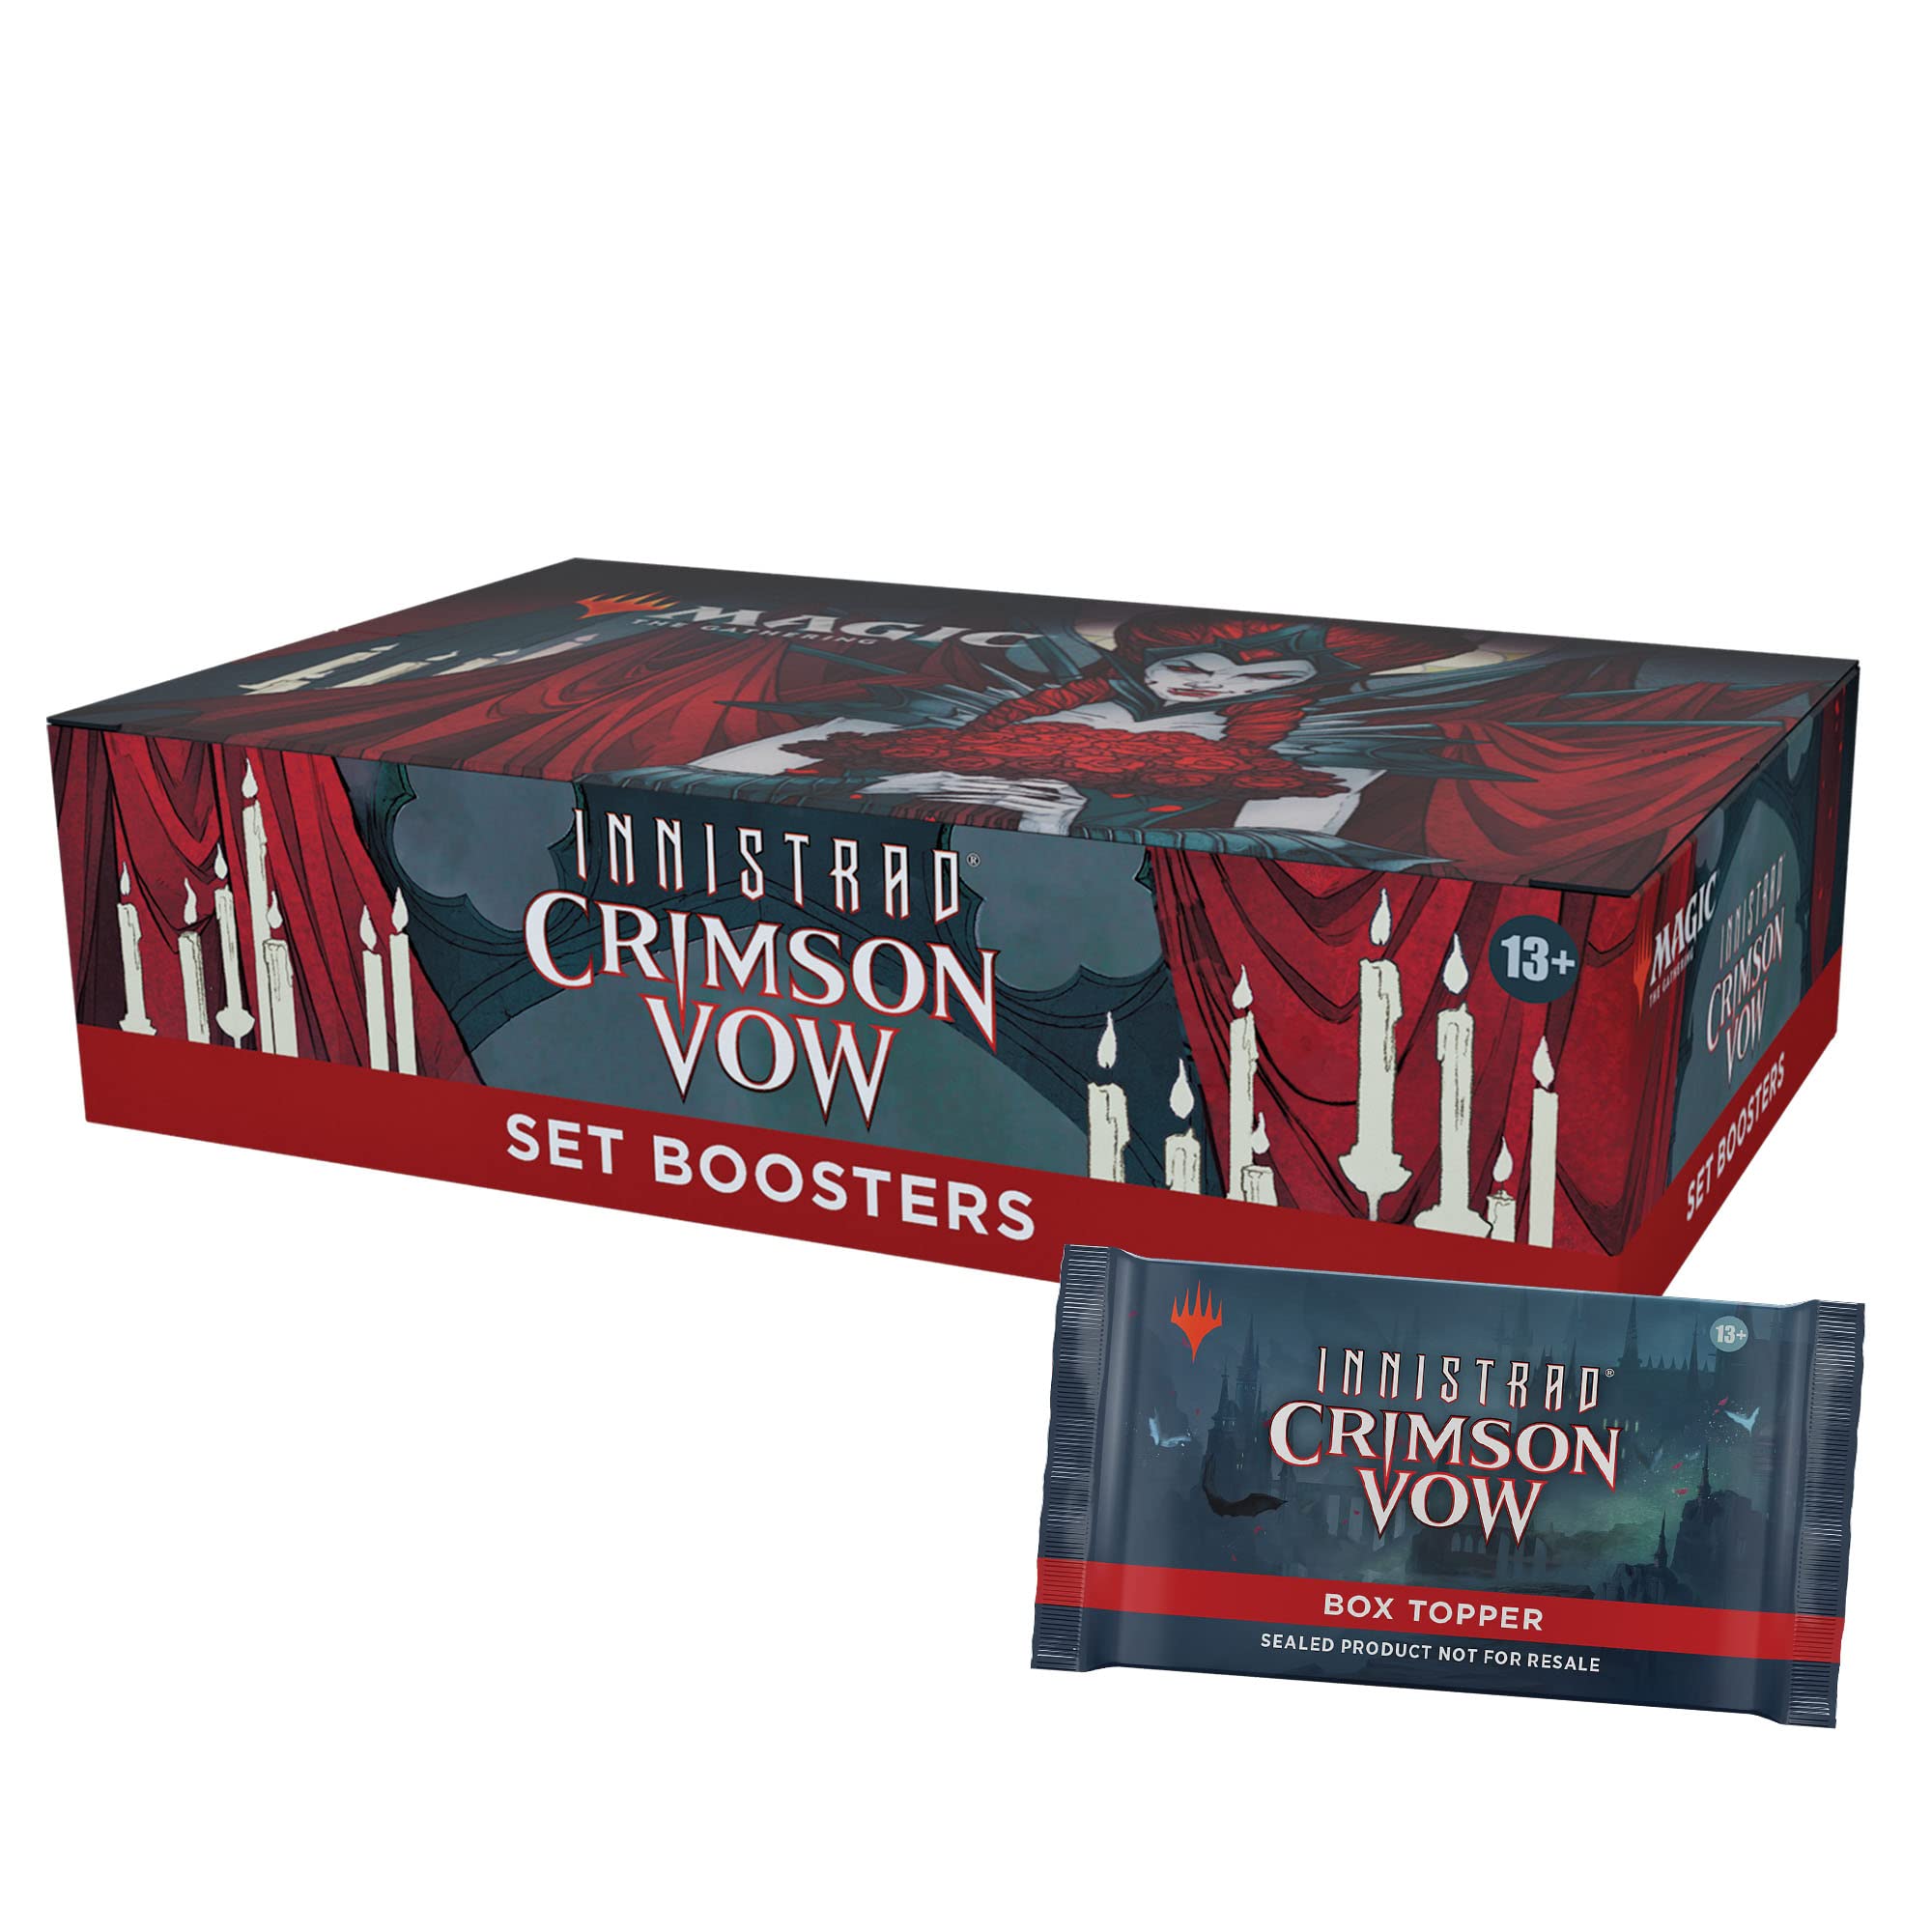 Magic The Gathering Innistrad: Crimson Vow Set Booster Box | 30 Packs + Dracula Box Topper (361 Magic Cards)